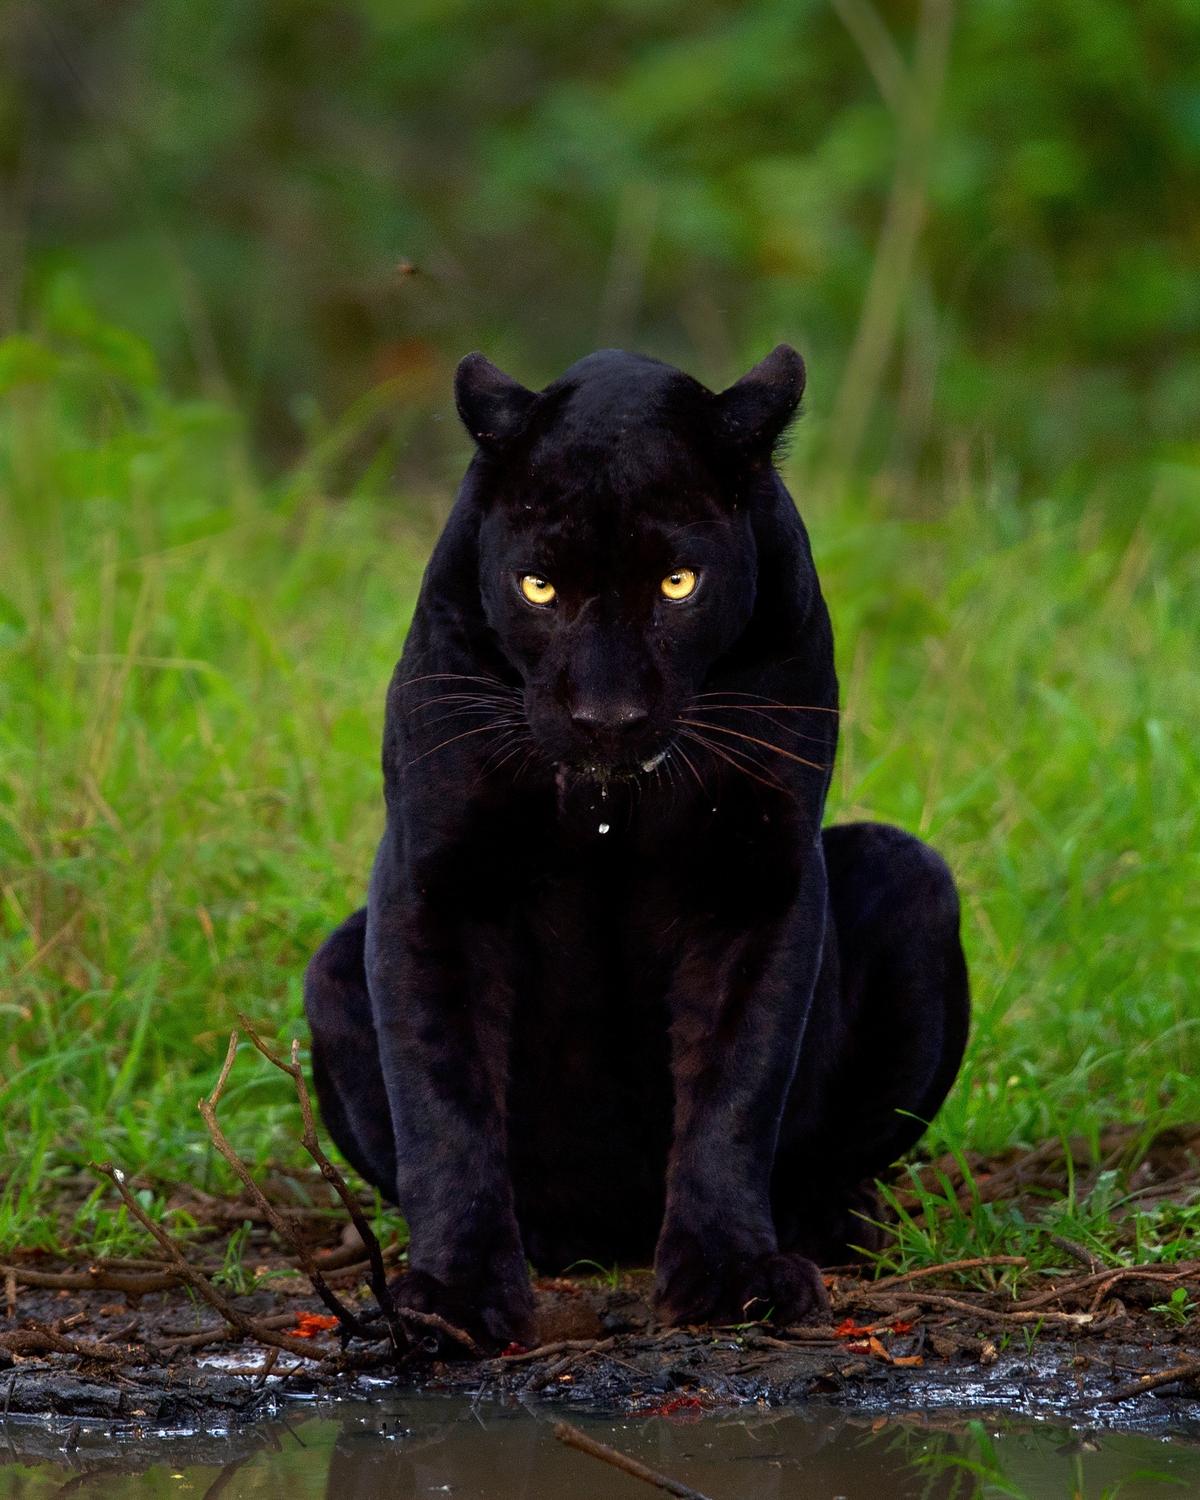 Another of Mithun H.'s favorite photographs of black panther Saaya (Courtesy of <a href="https://www.instagram.com/mithunhphotography/">Mithun H.</a>)